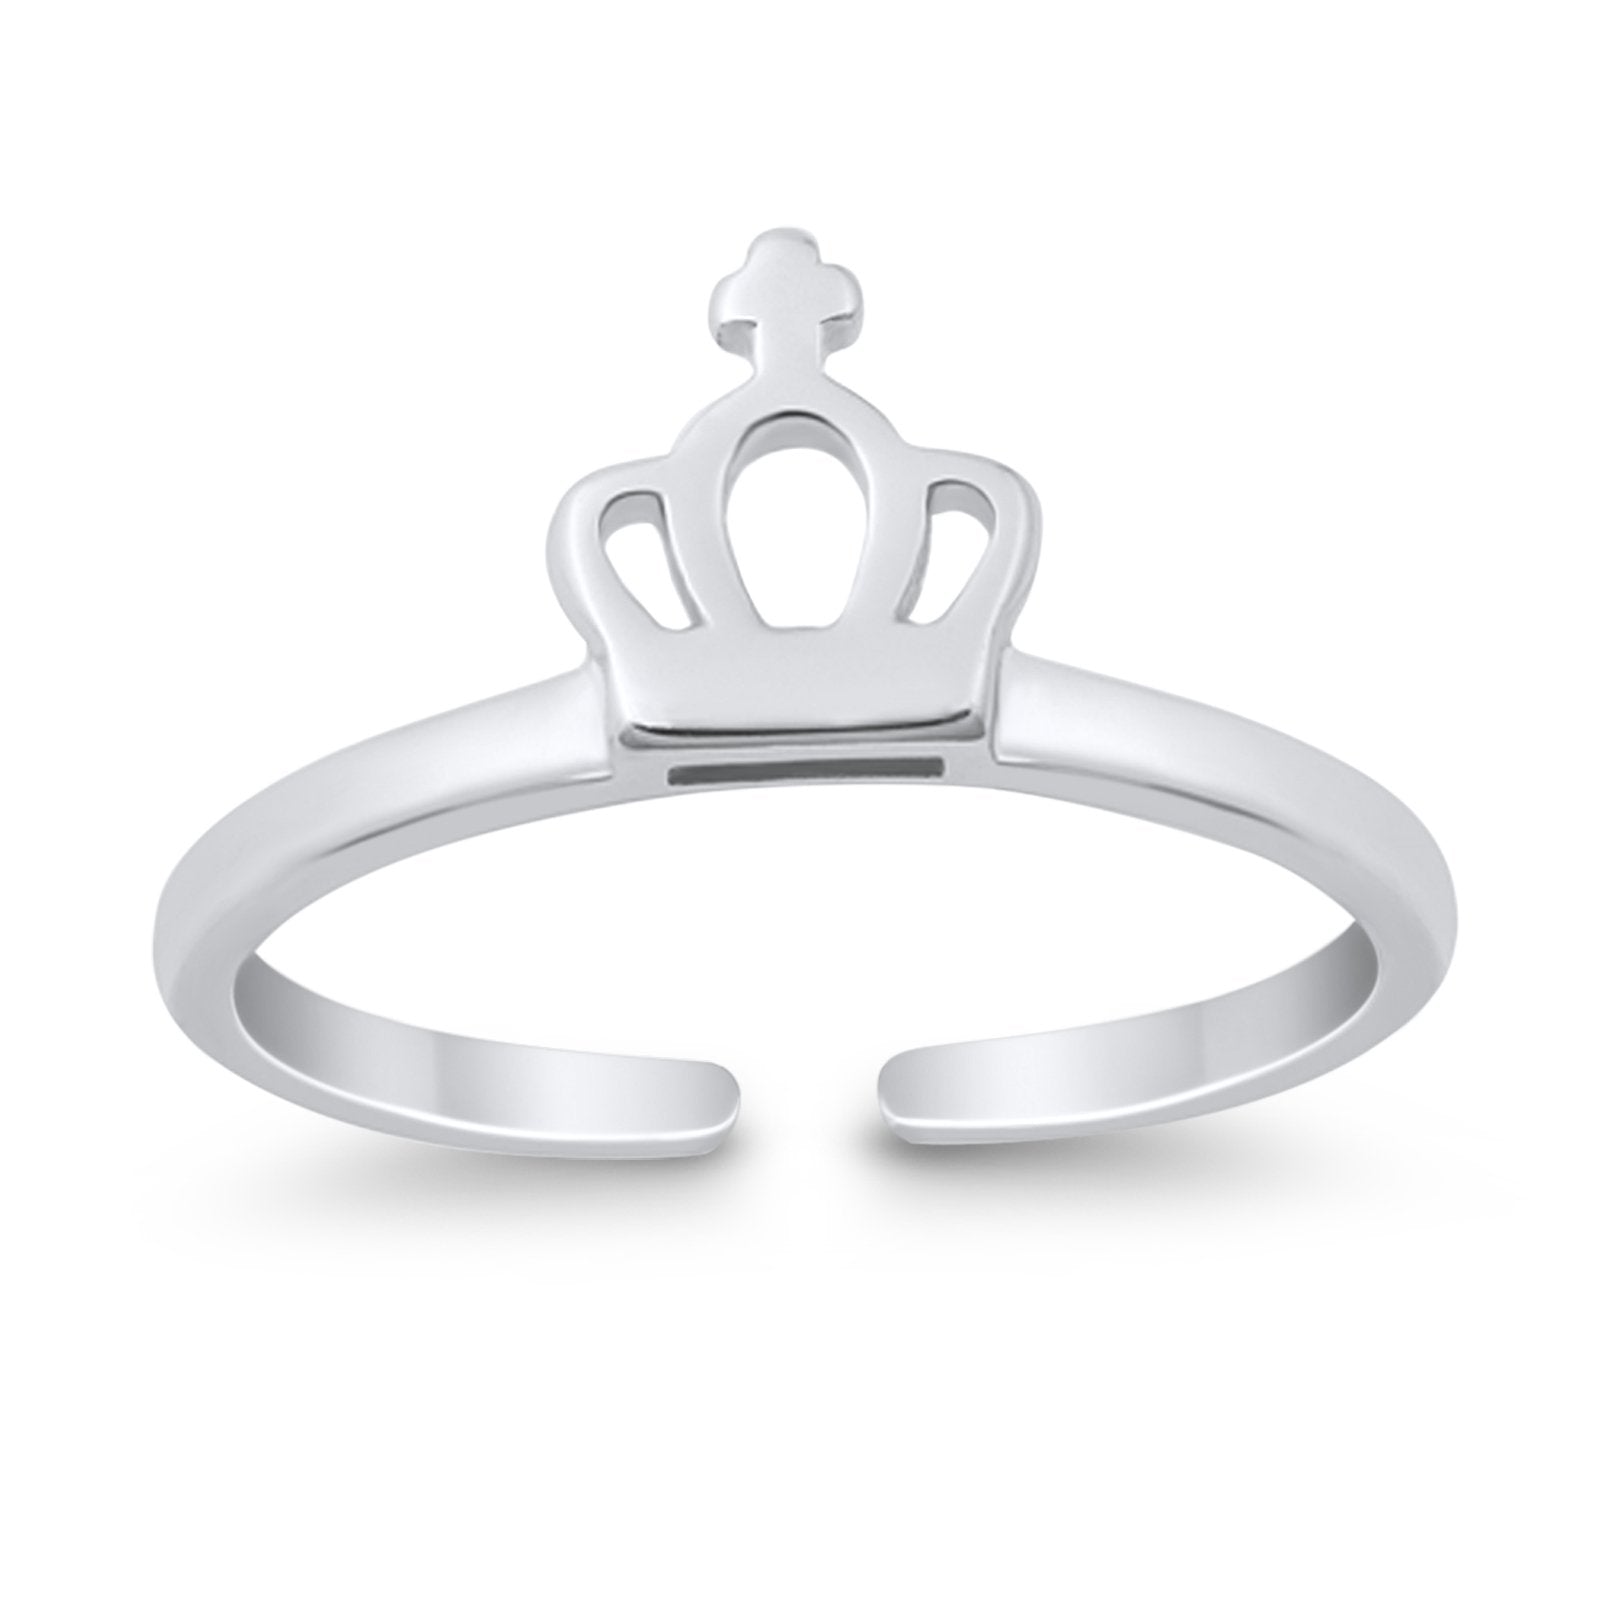 Adjustable Couple Rings Combo for Lovers Crown Engraved 'King Queen''  American diamond Valentine Gifts Adjustable Love